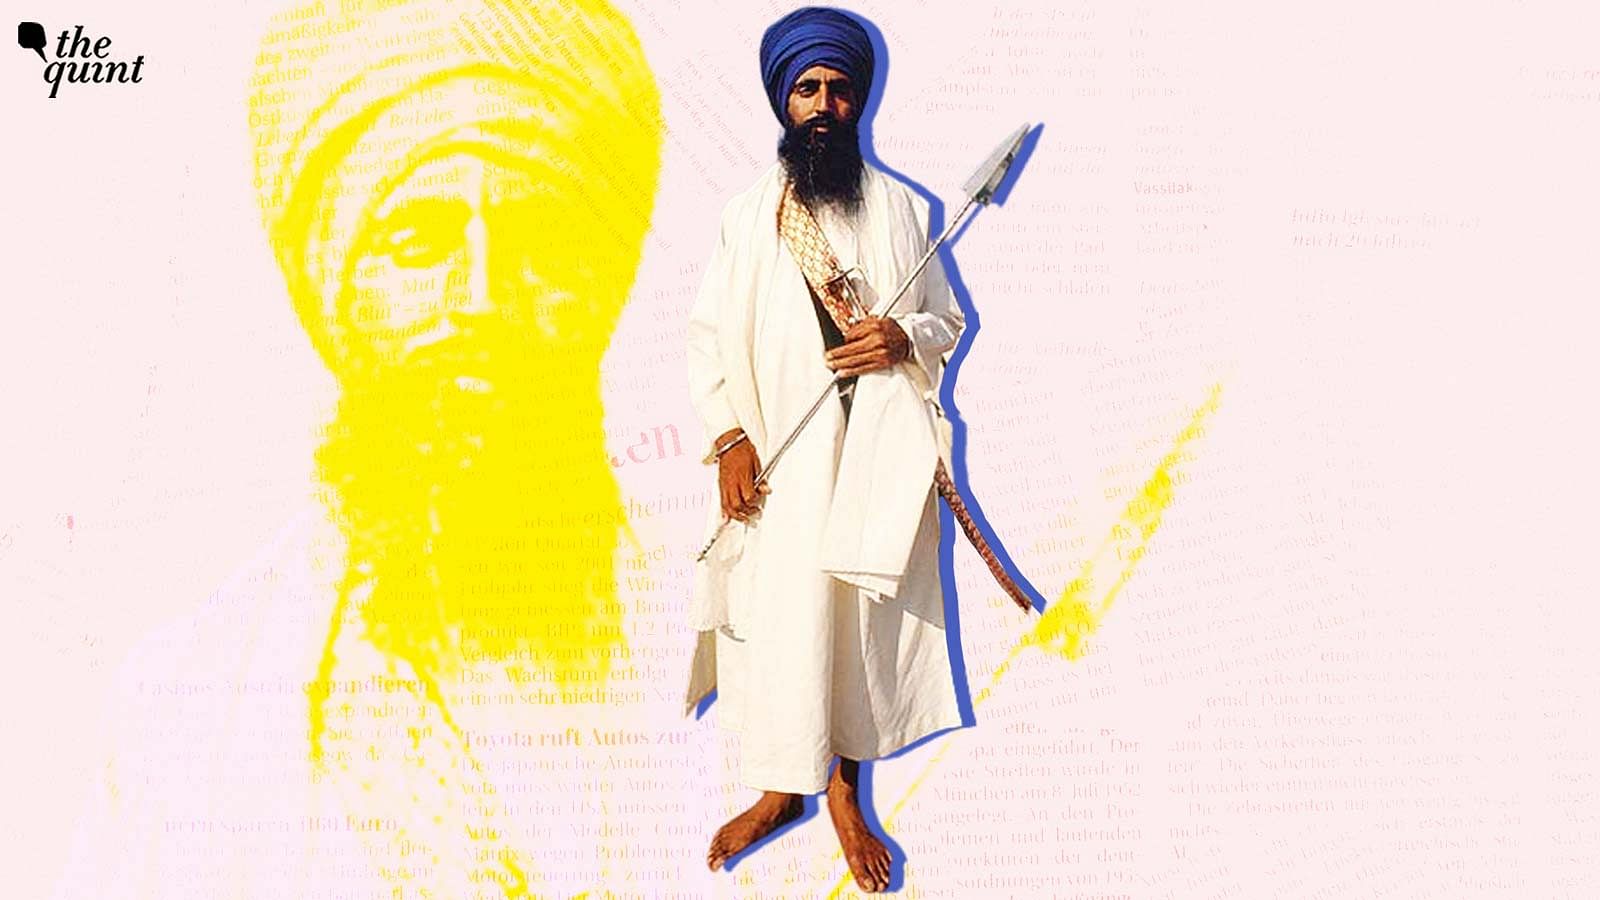 Top 999+ bhindranwale images – Amazing Collection bhindranwale images Full 4K